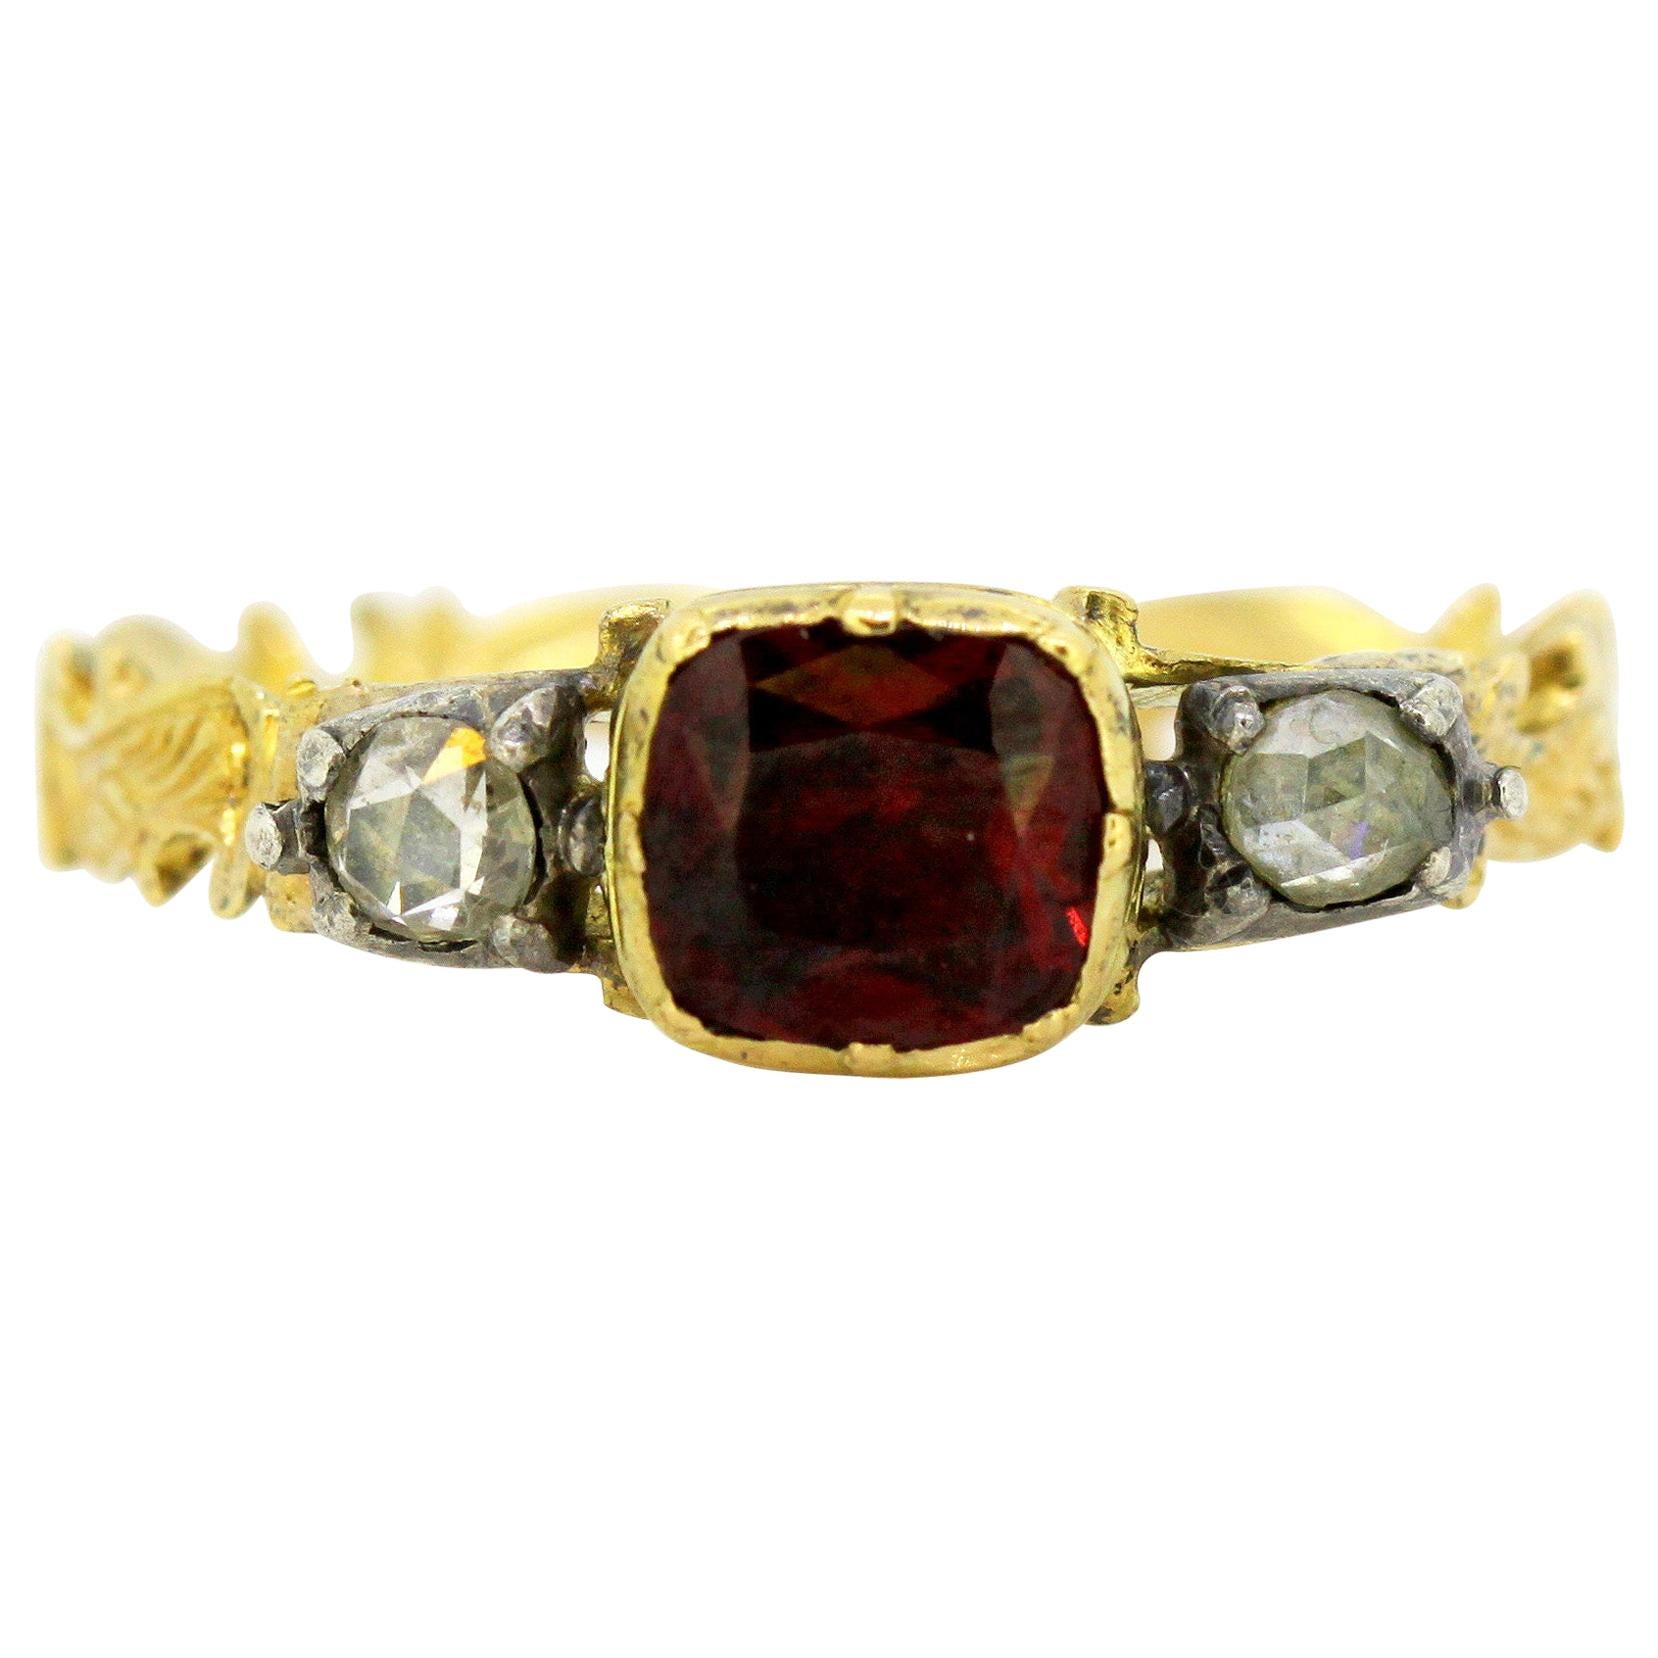 Antique Victorian 15 Karat Gold Ring with Ruby and Diamonds, England, 1860s